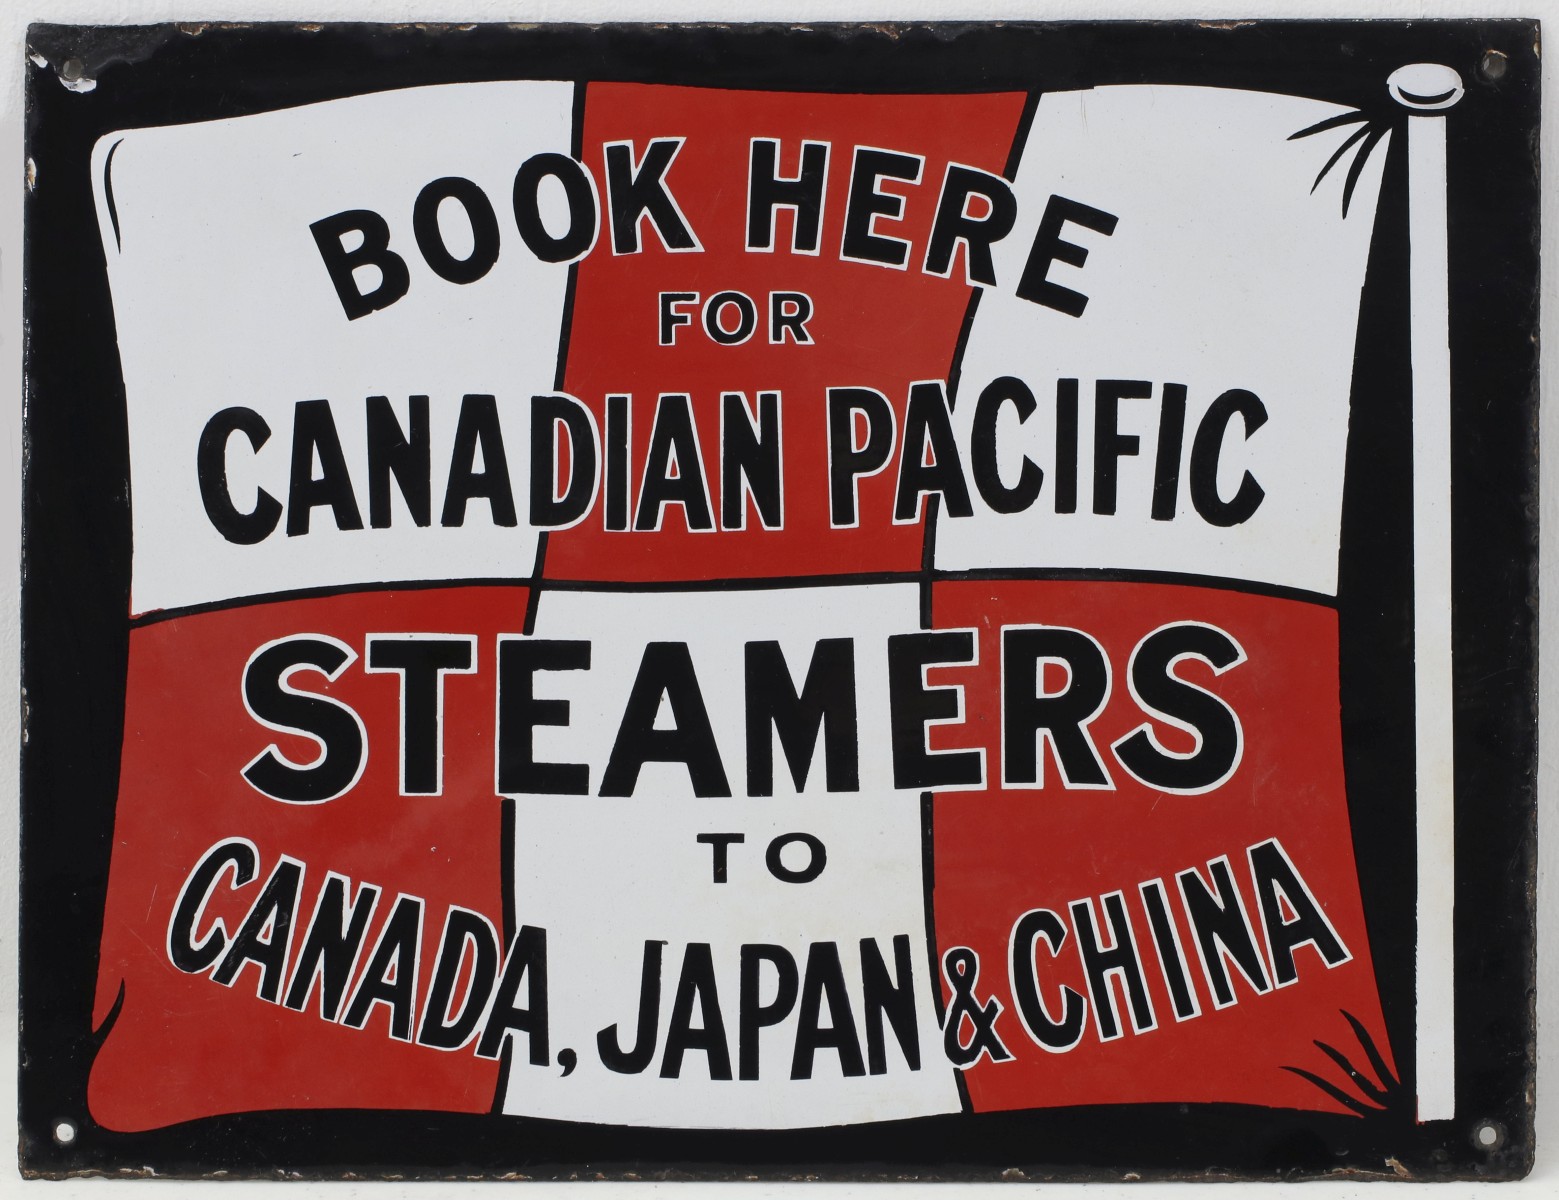 PORCELAIN ENAMEL SIGN FOR CANADIAN PACIFIC STEAMERS